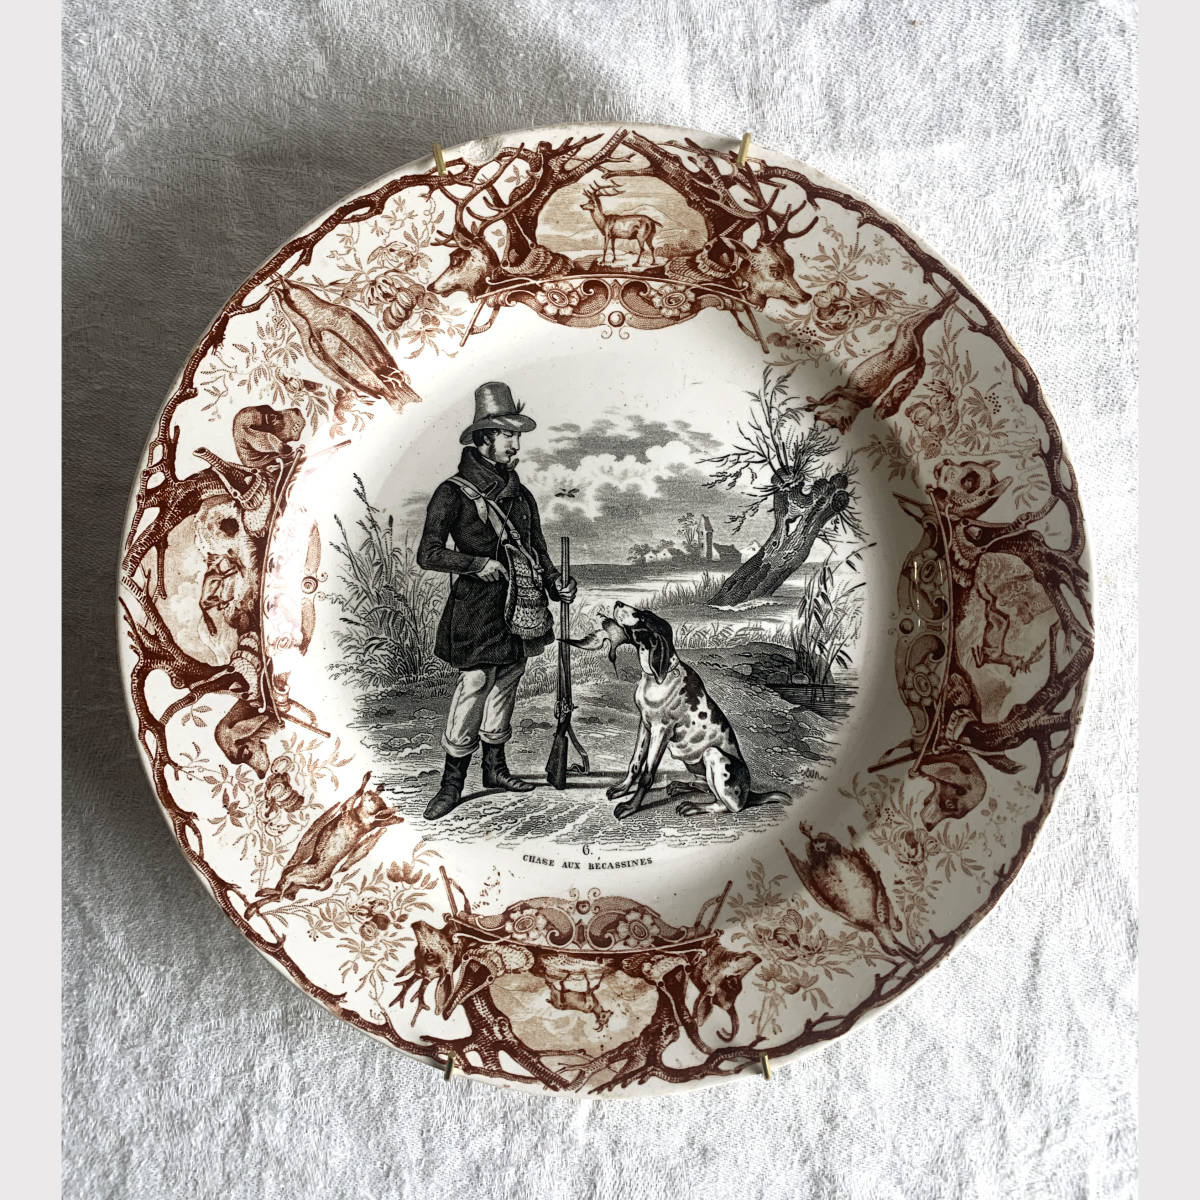  Belgium 19 century latter term BOCH Freres hunting dog hunting ceramics plate . plate g Liza iyu Royal jibie... picture fine art antique antique 6